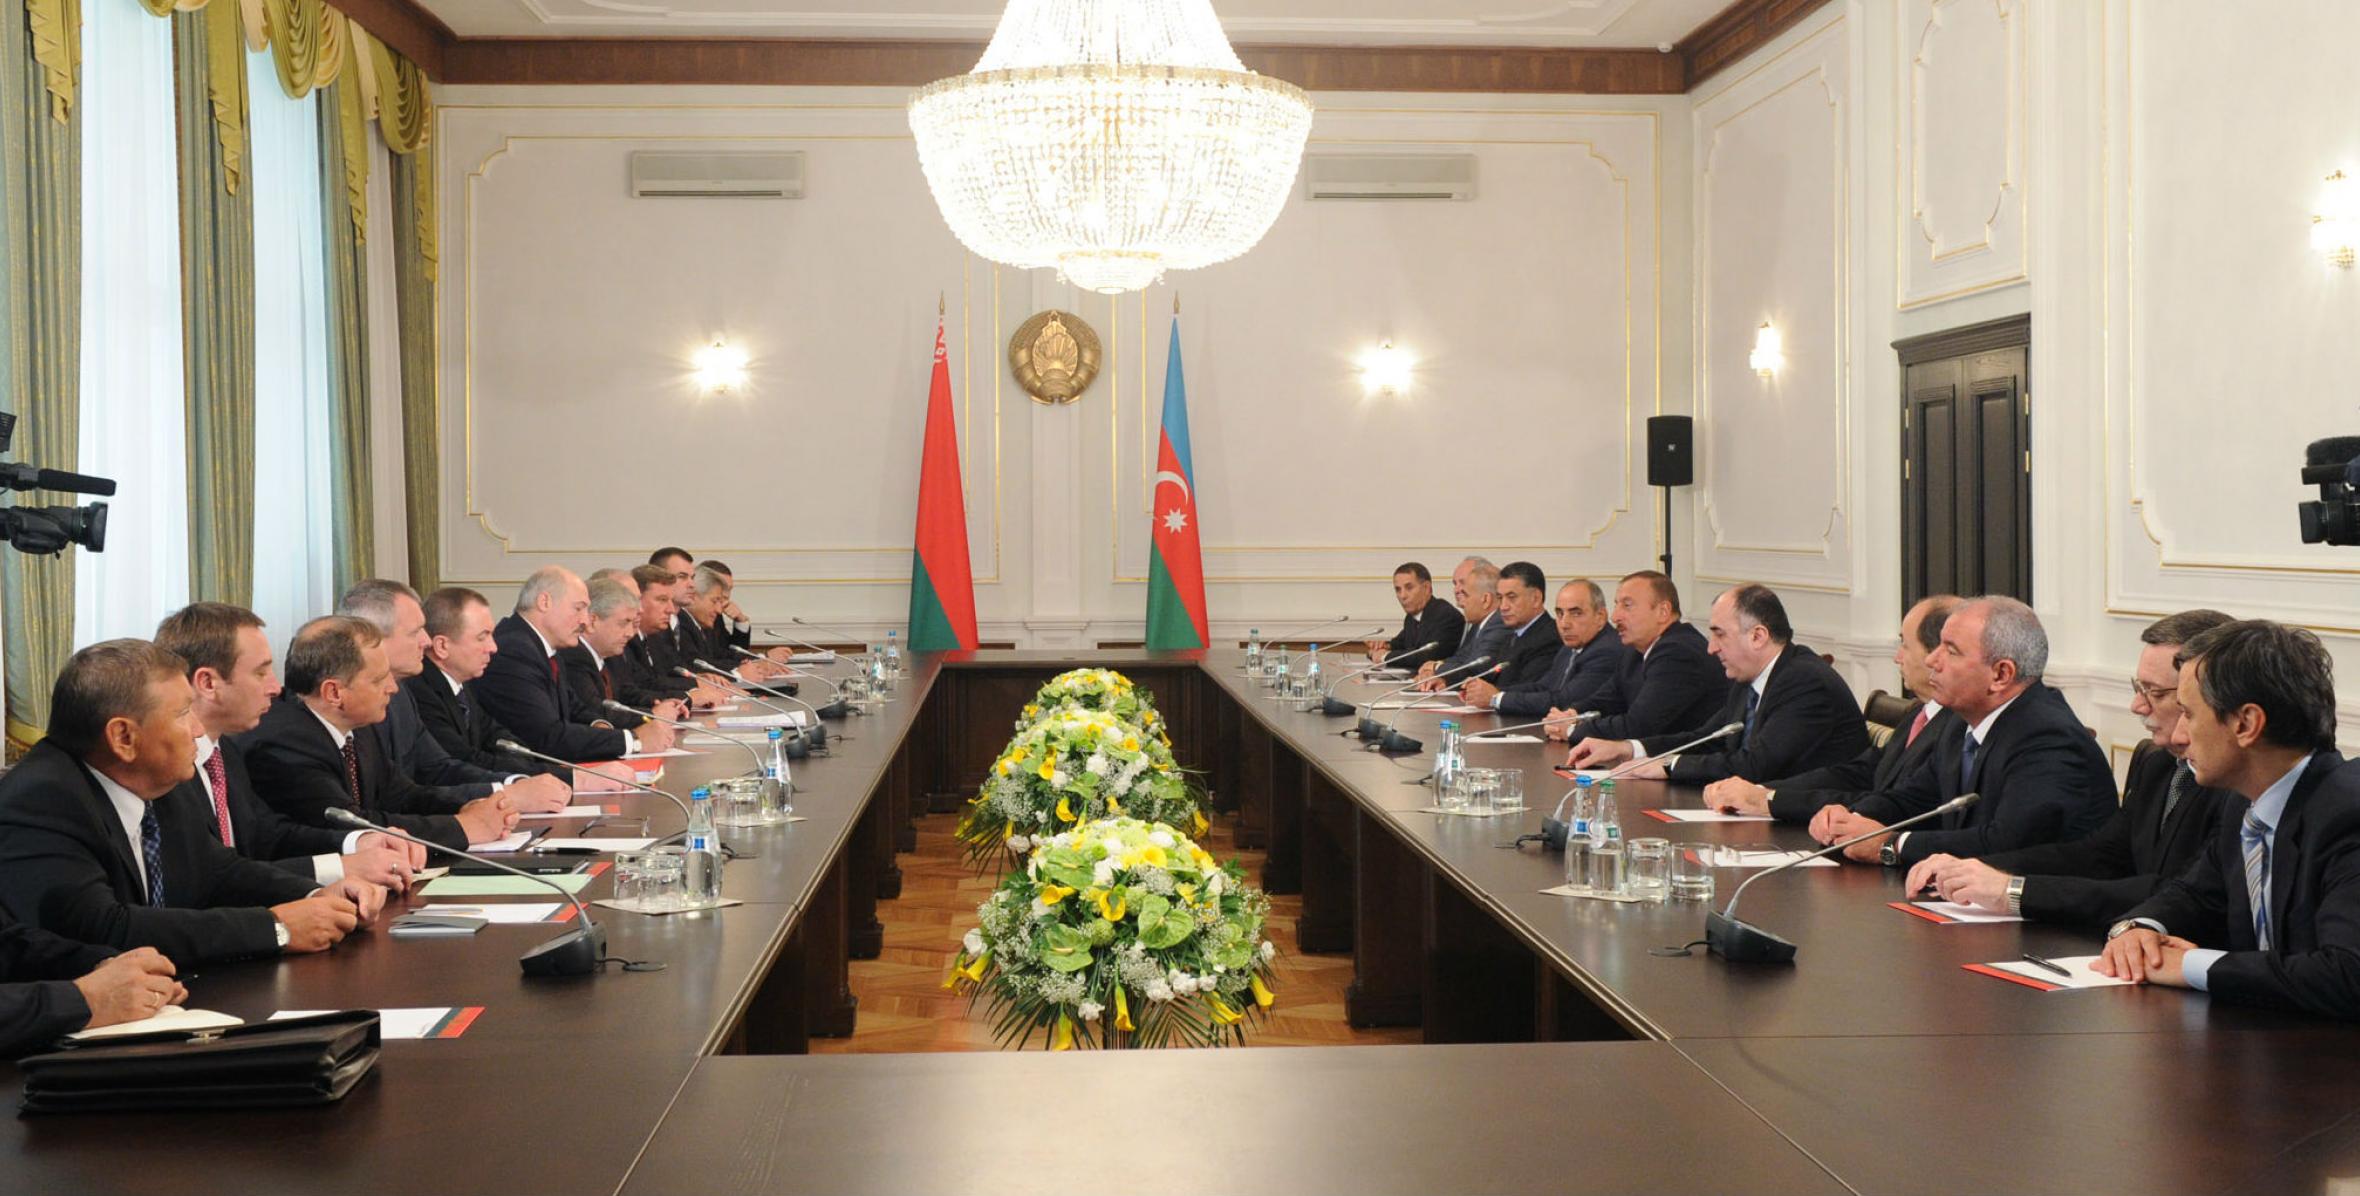 Ilham Aliyev and President of Belarus Alexander Lukashenko held a meeting in an expanded format with the participation of delegations